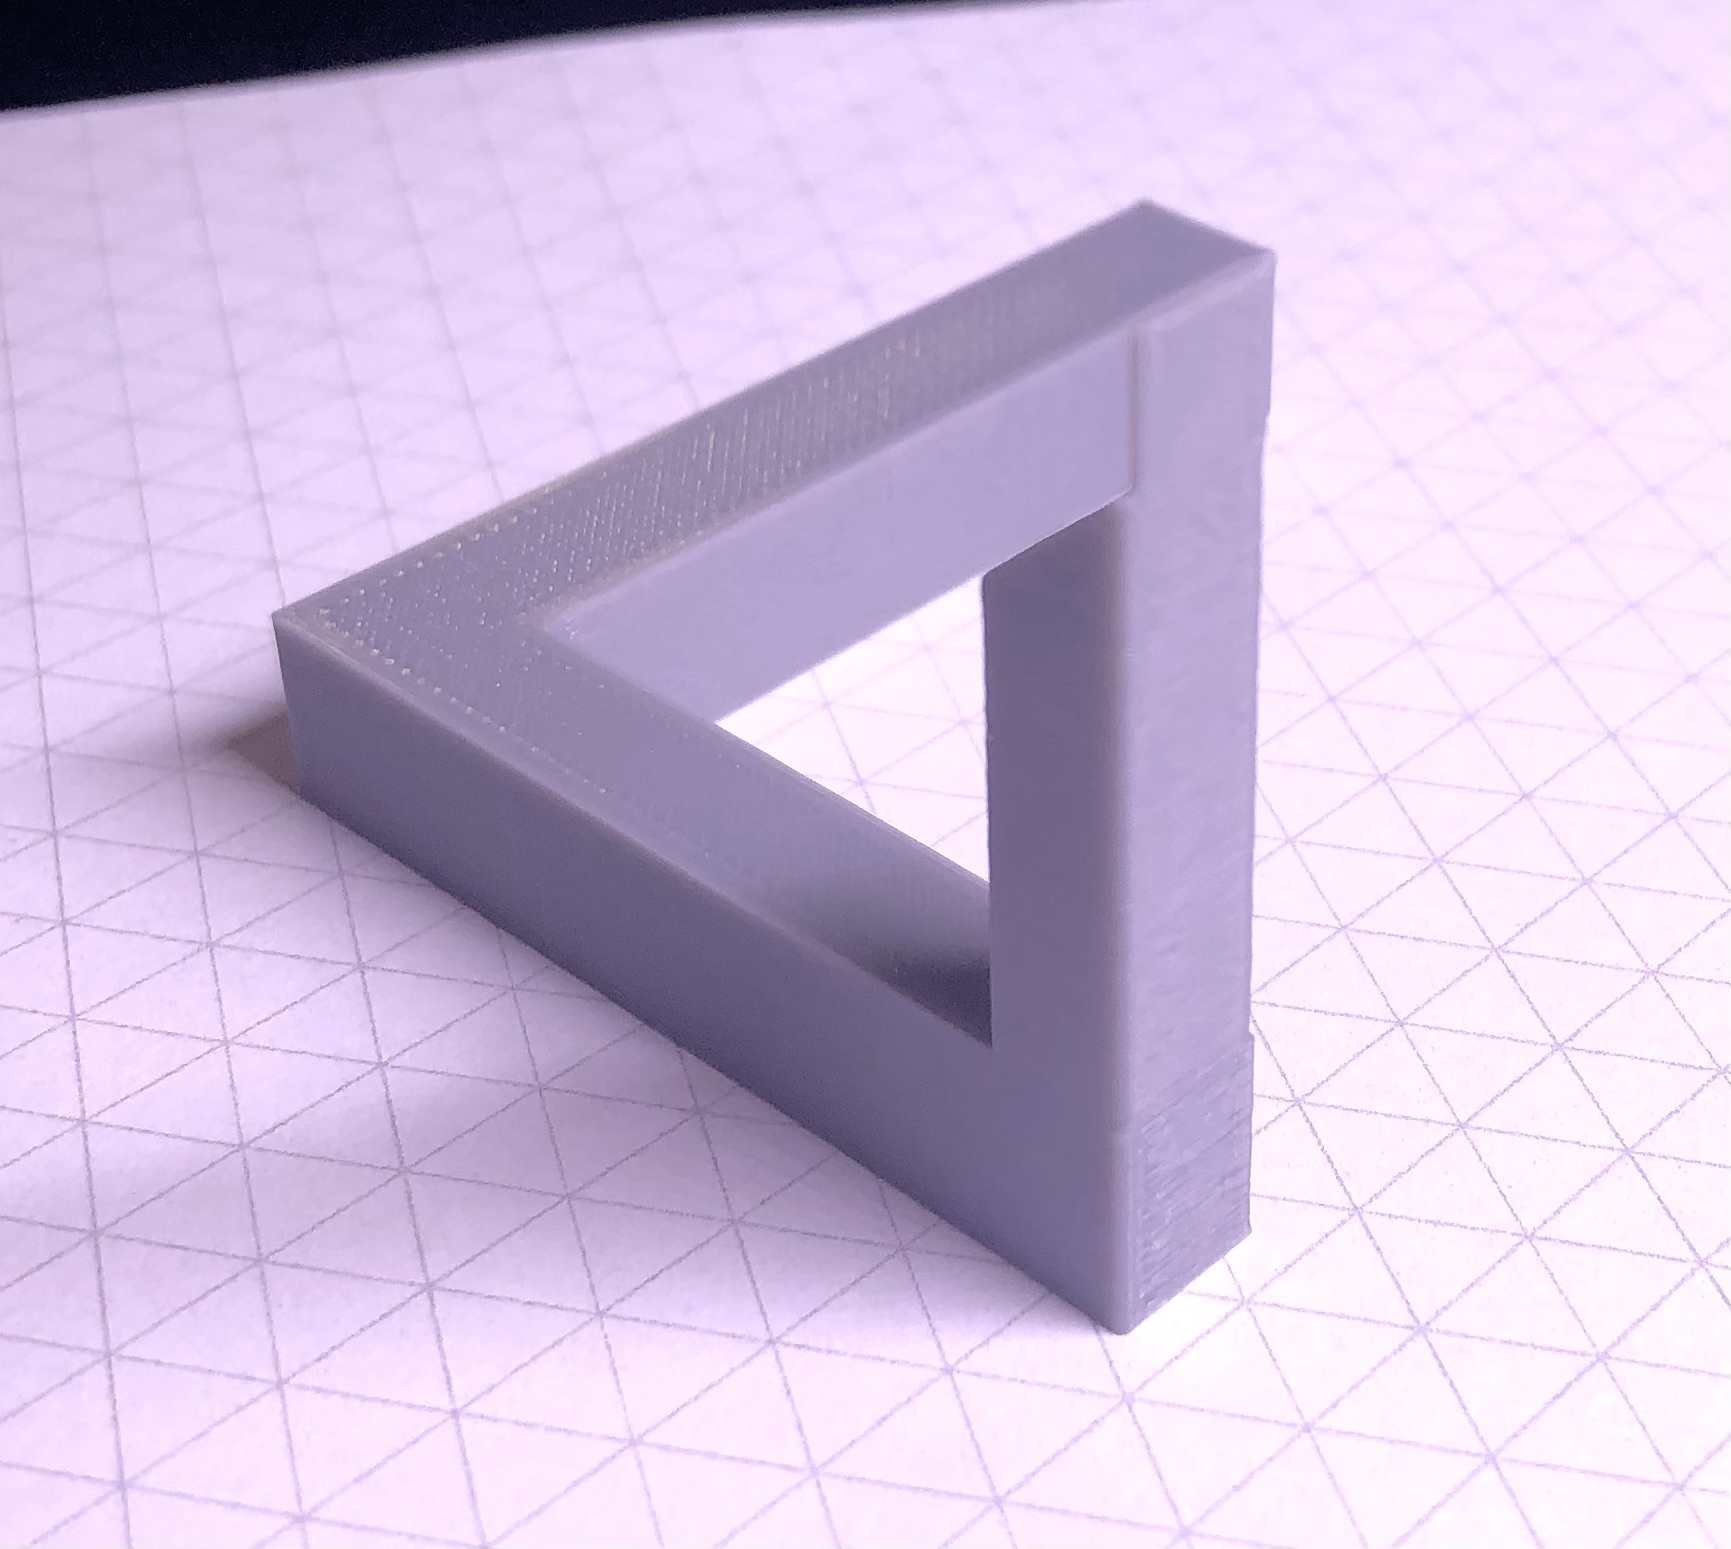 3D Printed Penrose Triangle Impossible Object Optical Illusion by